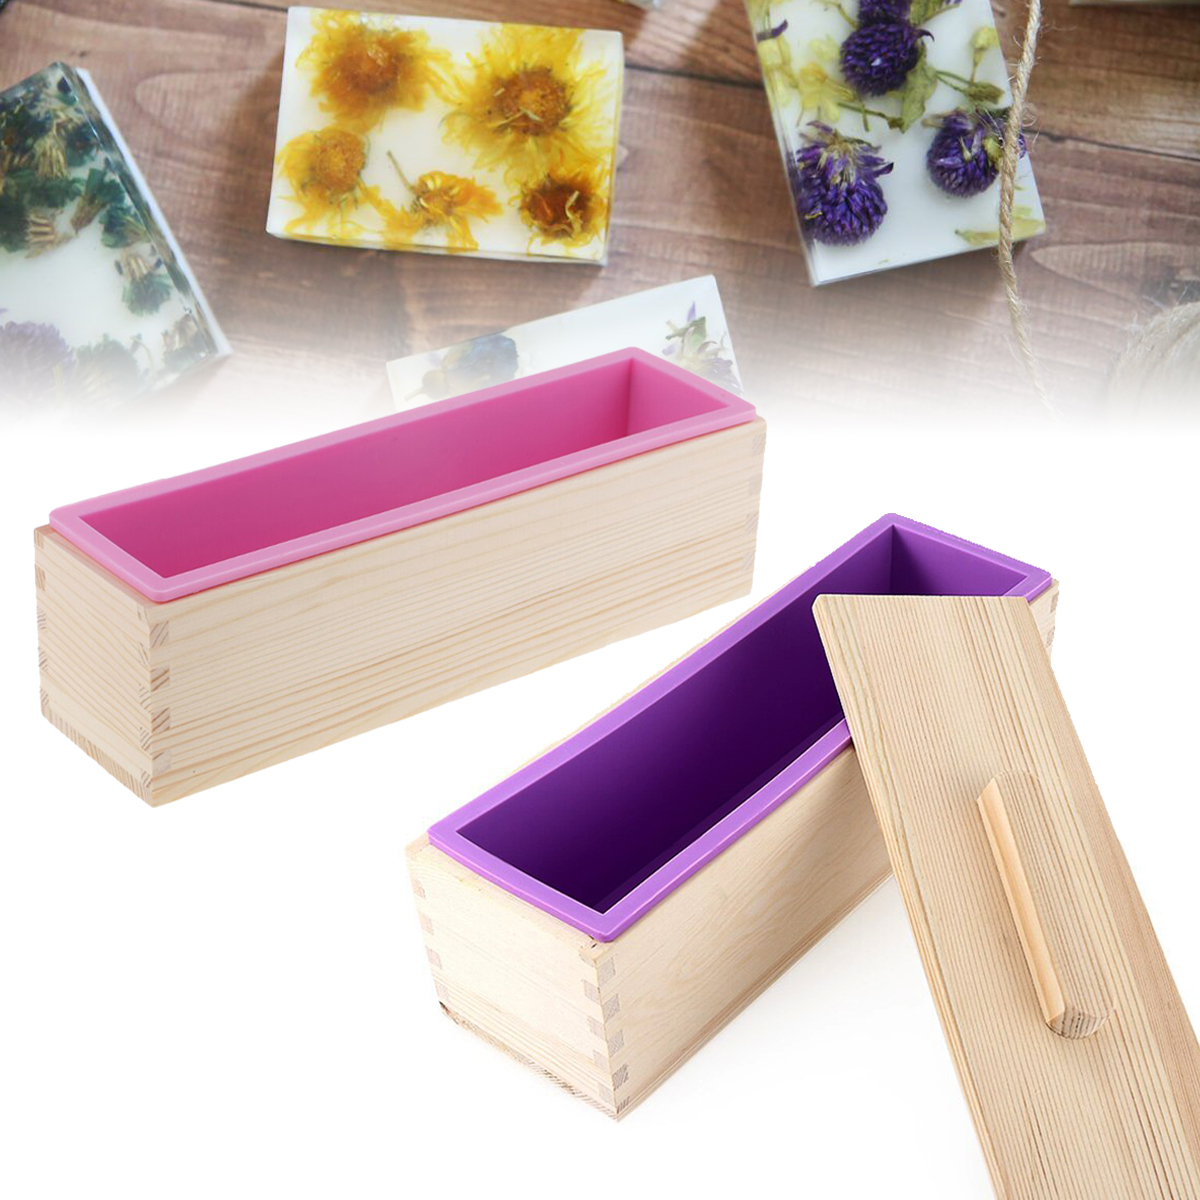 New-Wood-Loaf-Soap-Mould-with-Silicone-Mold-Cake-Making-Wooden-Box-Soap-1602226-1